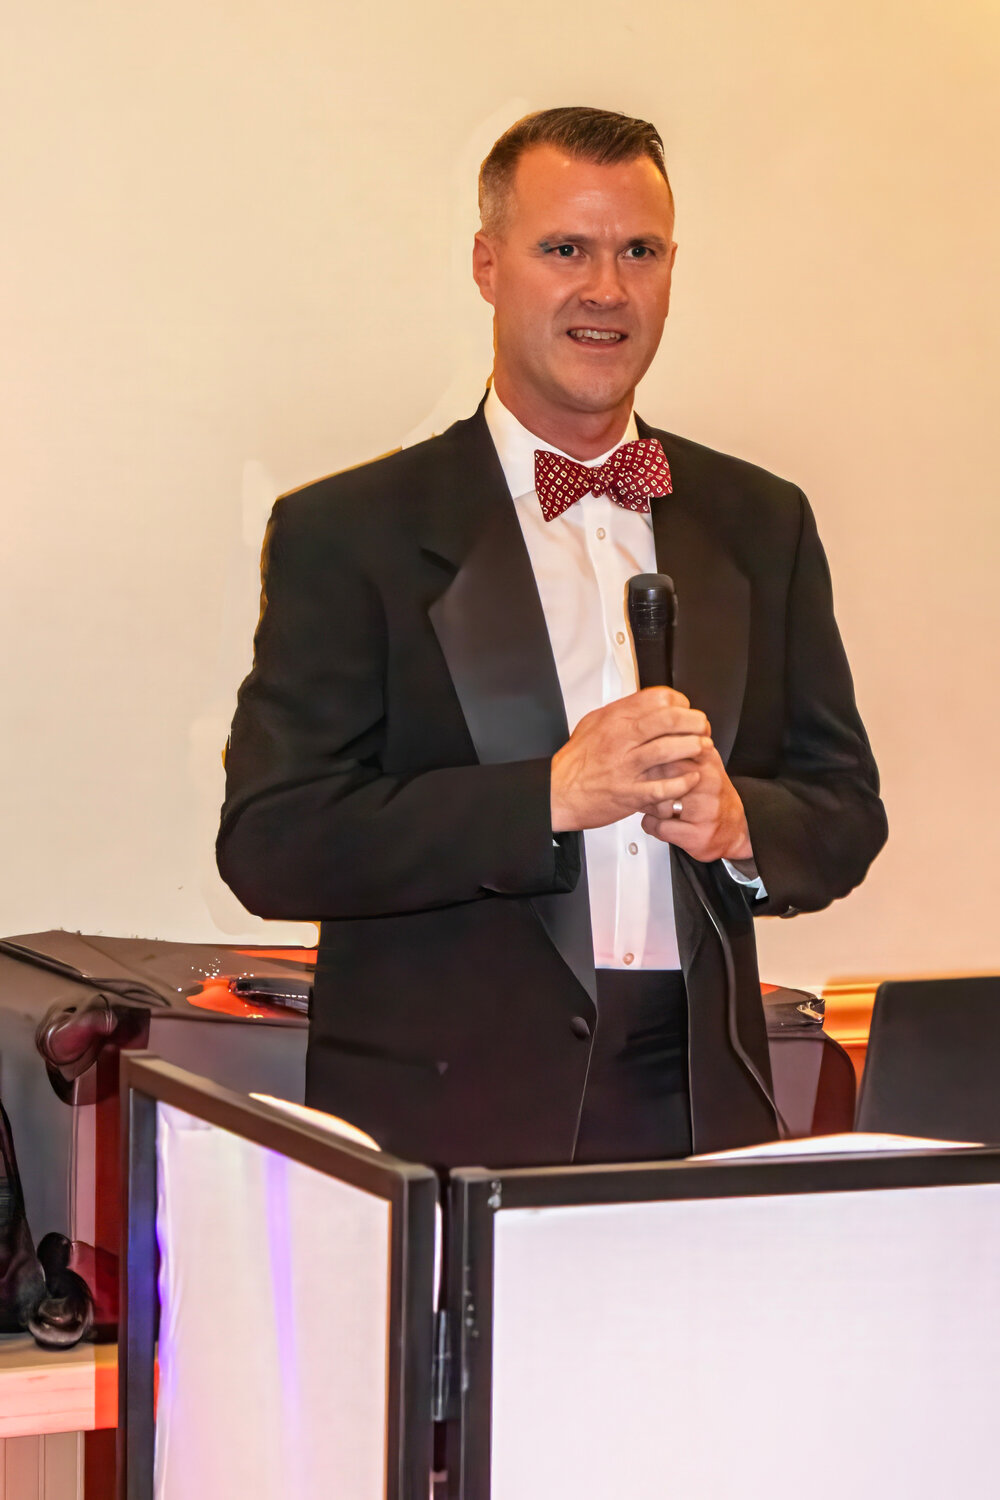 Mayor Tim Sullivan — in a festive red bowtie that perfectly fits the festive season — spoke at Malverne Historical Society’s holiday gala celebrating the villlage’s centennial.